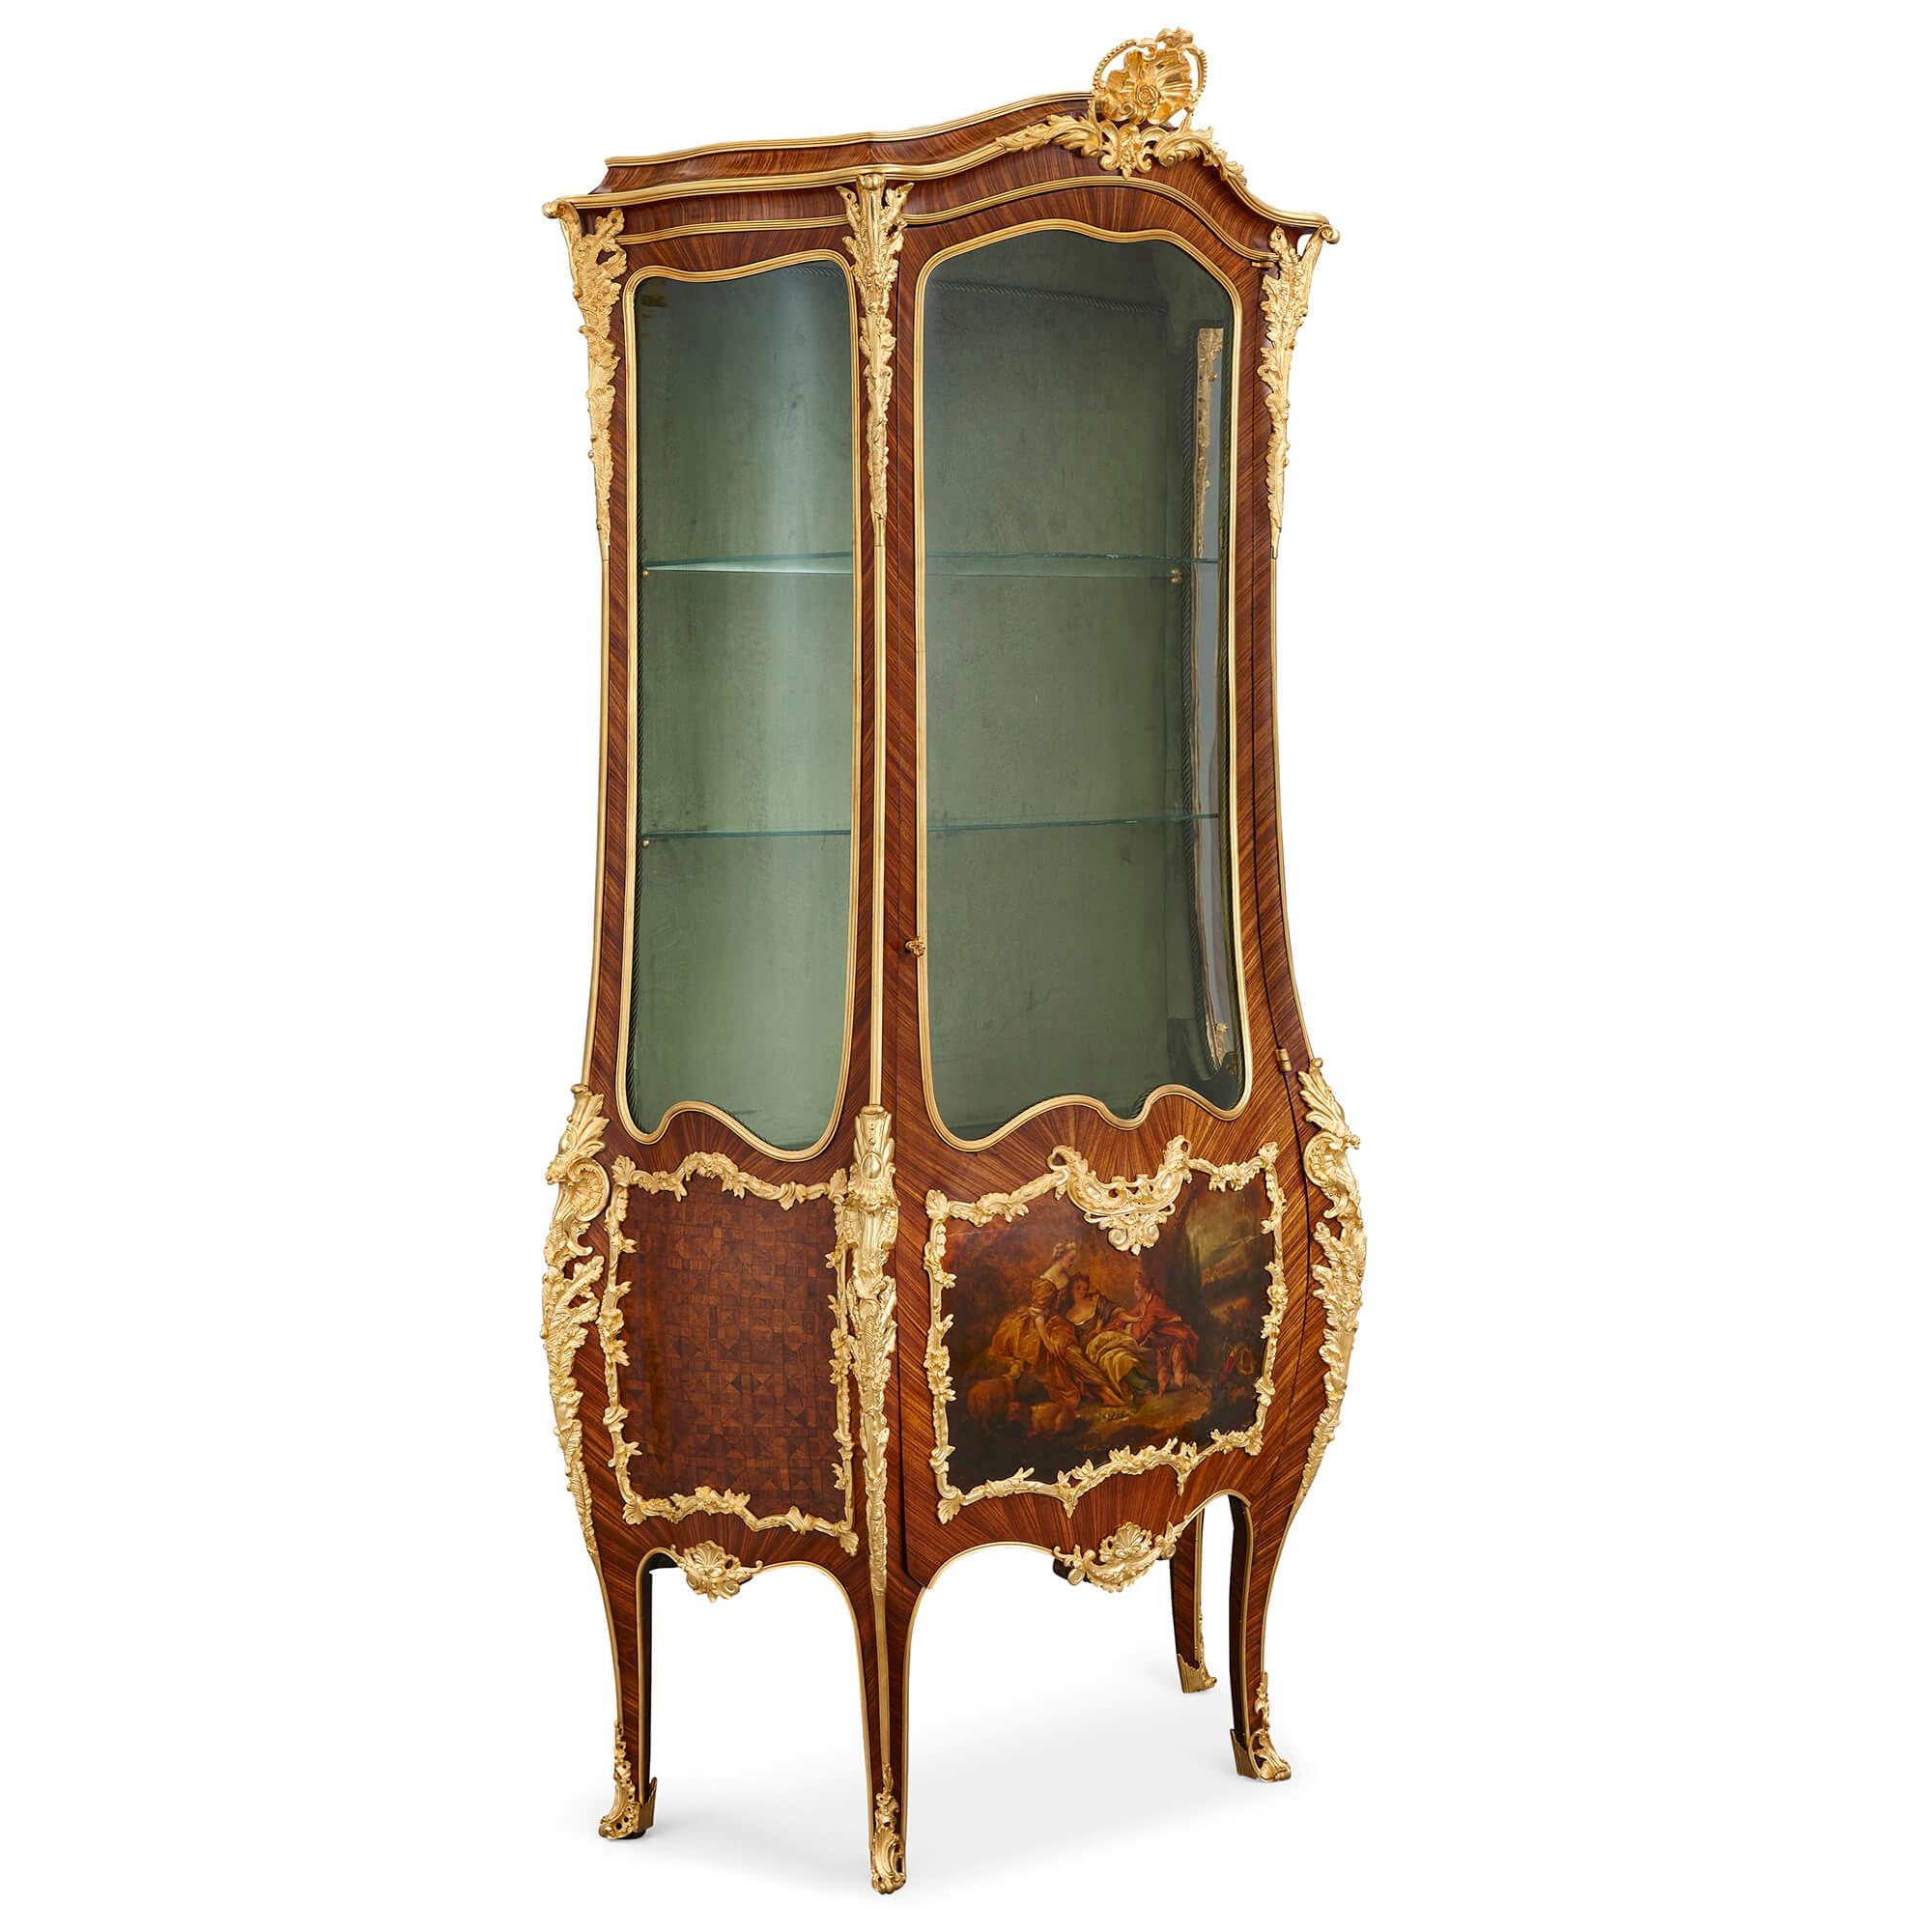 A Louis XV style gilt-bronze mounted Vernis Martin and parquetry vitrine
French, c.1880
Height 197cm, width 102cm, depth 49cm

This remarkable work is a Louis XV style, Vernis Martin, parquetry, and gilt-bronze vitrine, made towards the end of